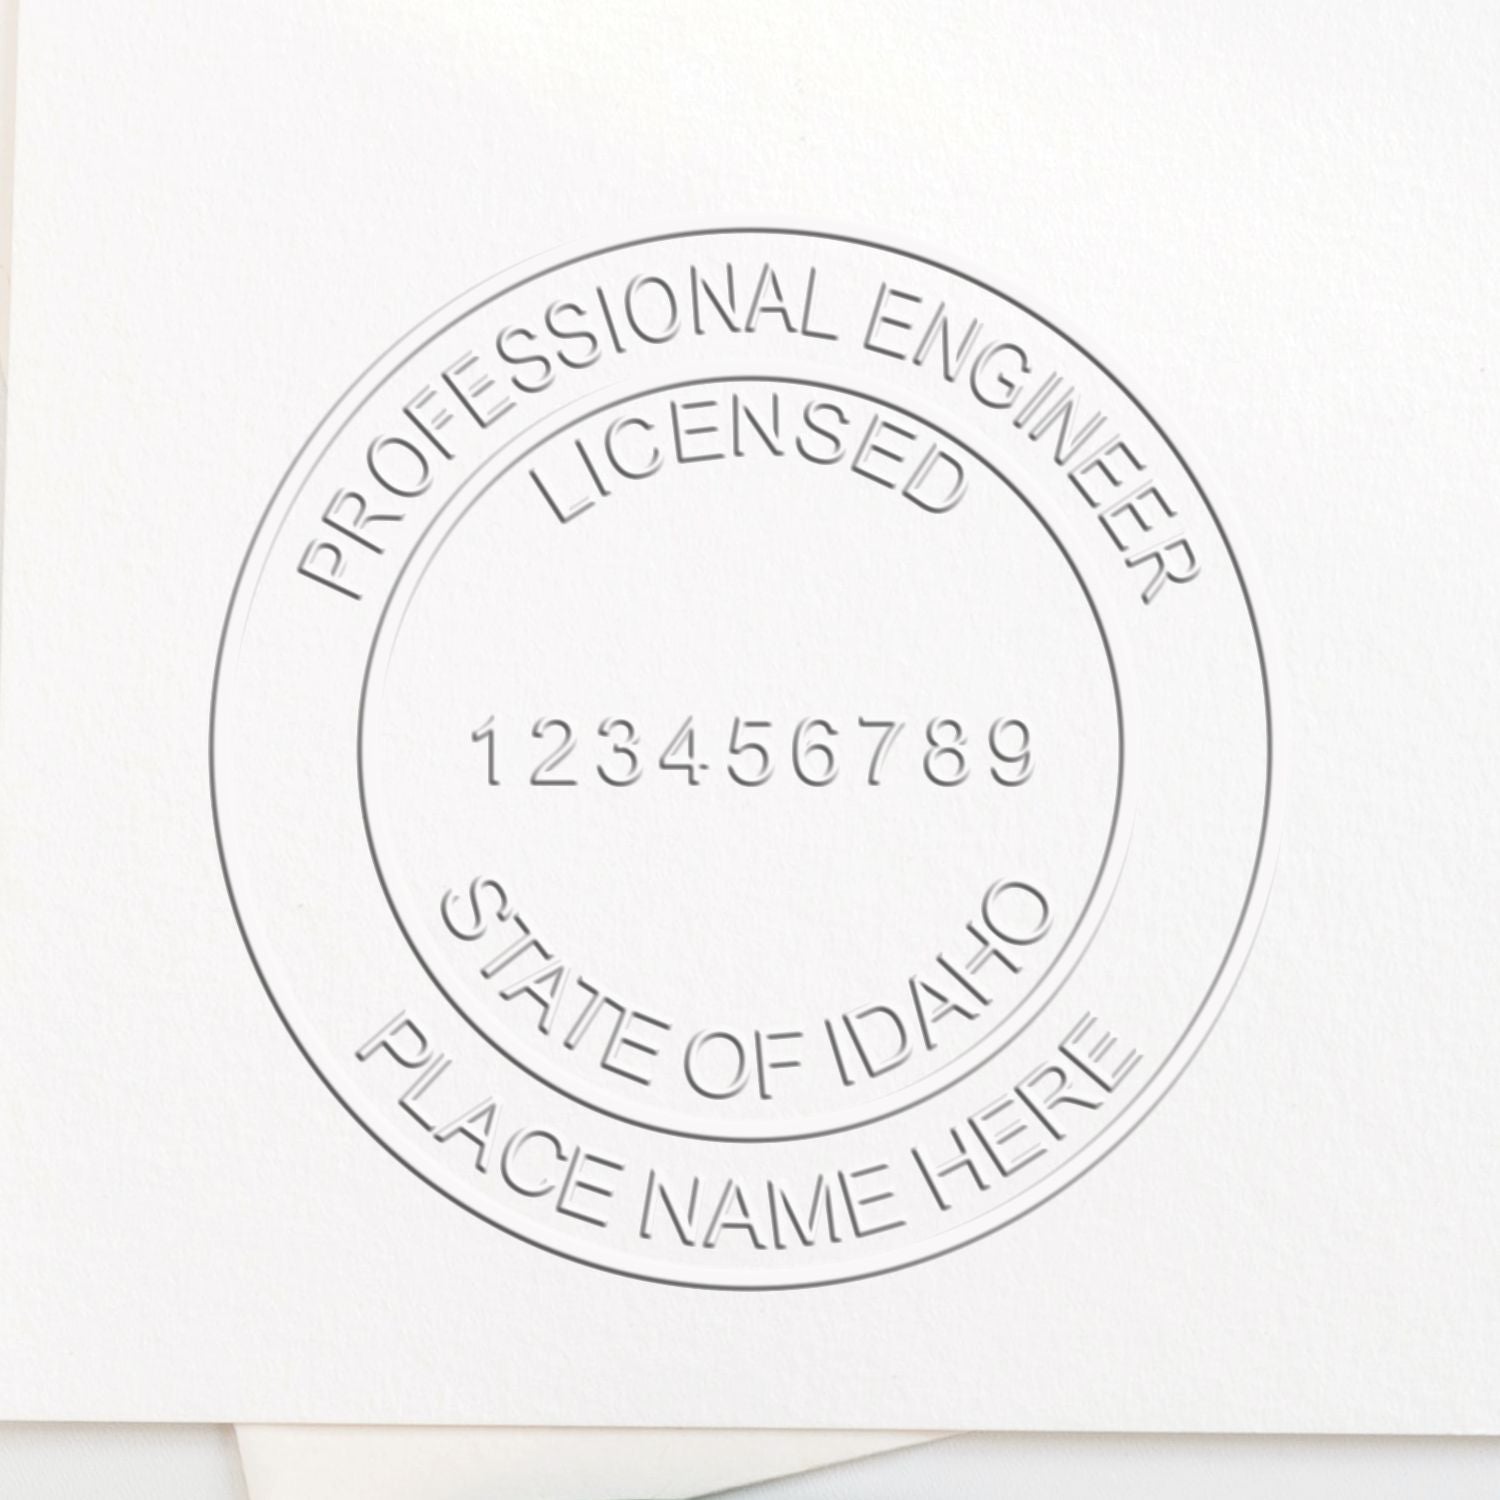 The Heavy Duty Cast Iron Idaho Engineer Seal Embosser stamp impression comes to life with a crisp, detailed photo on paper - showcasing true professional quality.